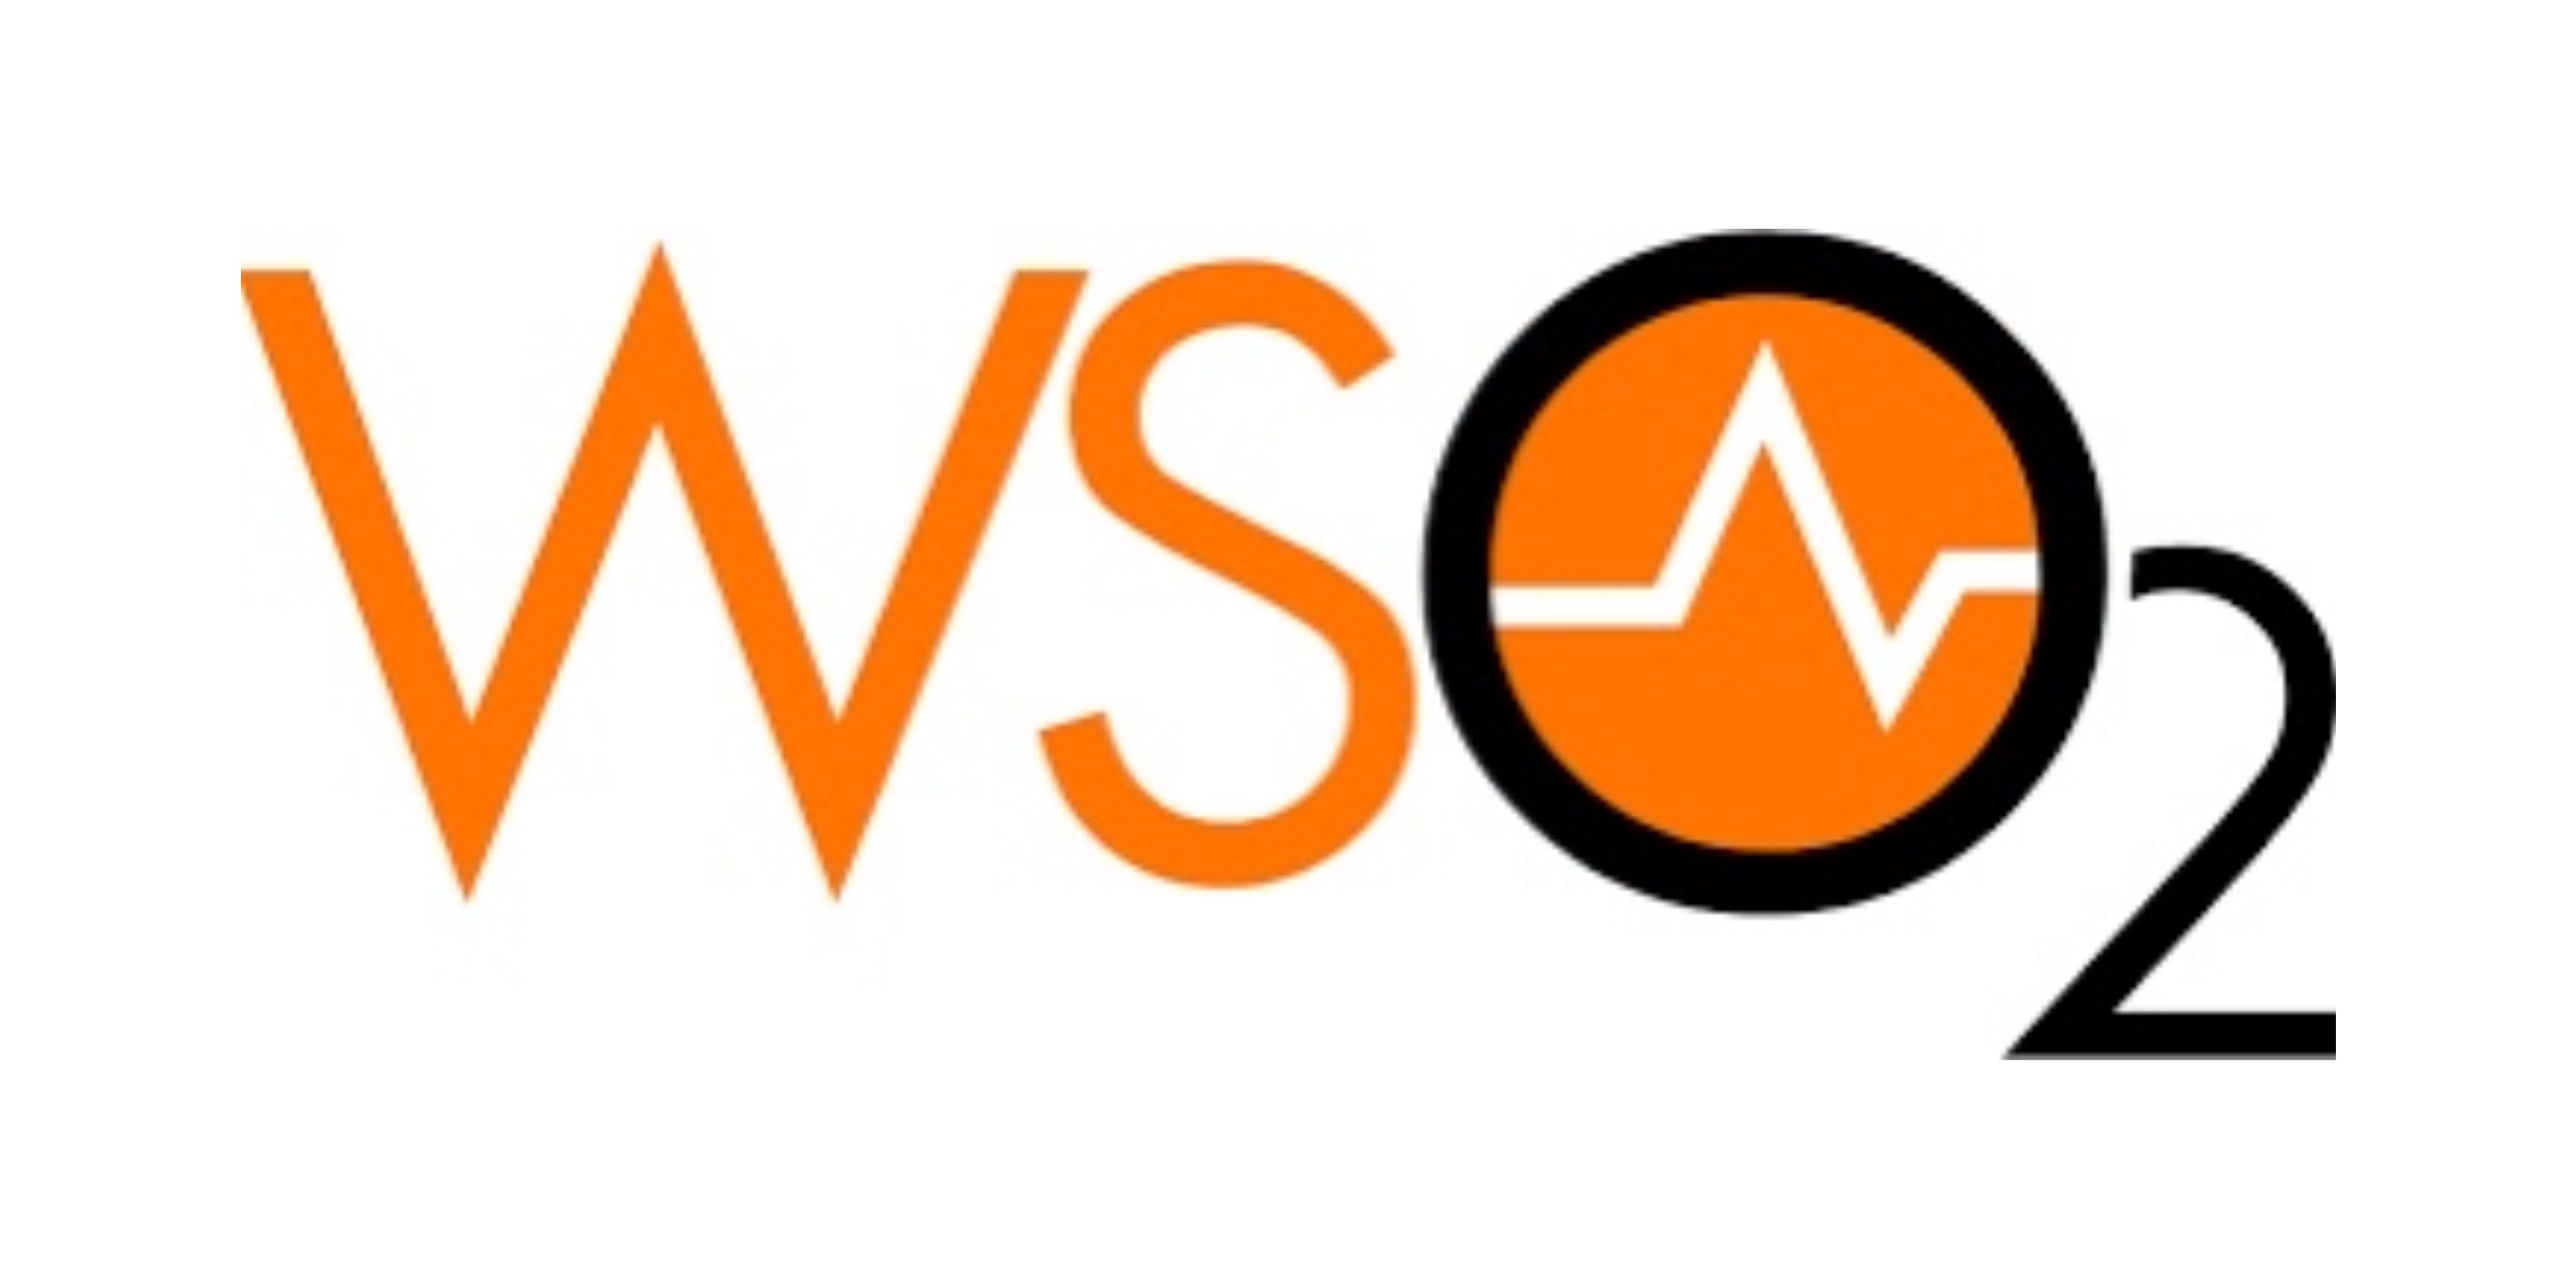 WSO2 Expands Global Customer Base and Revenues in 2020